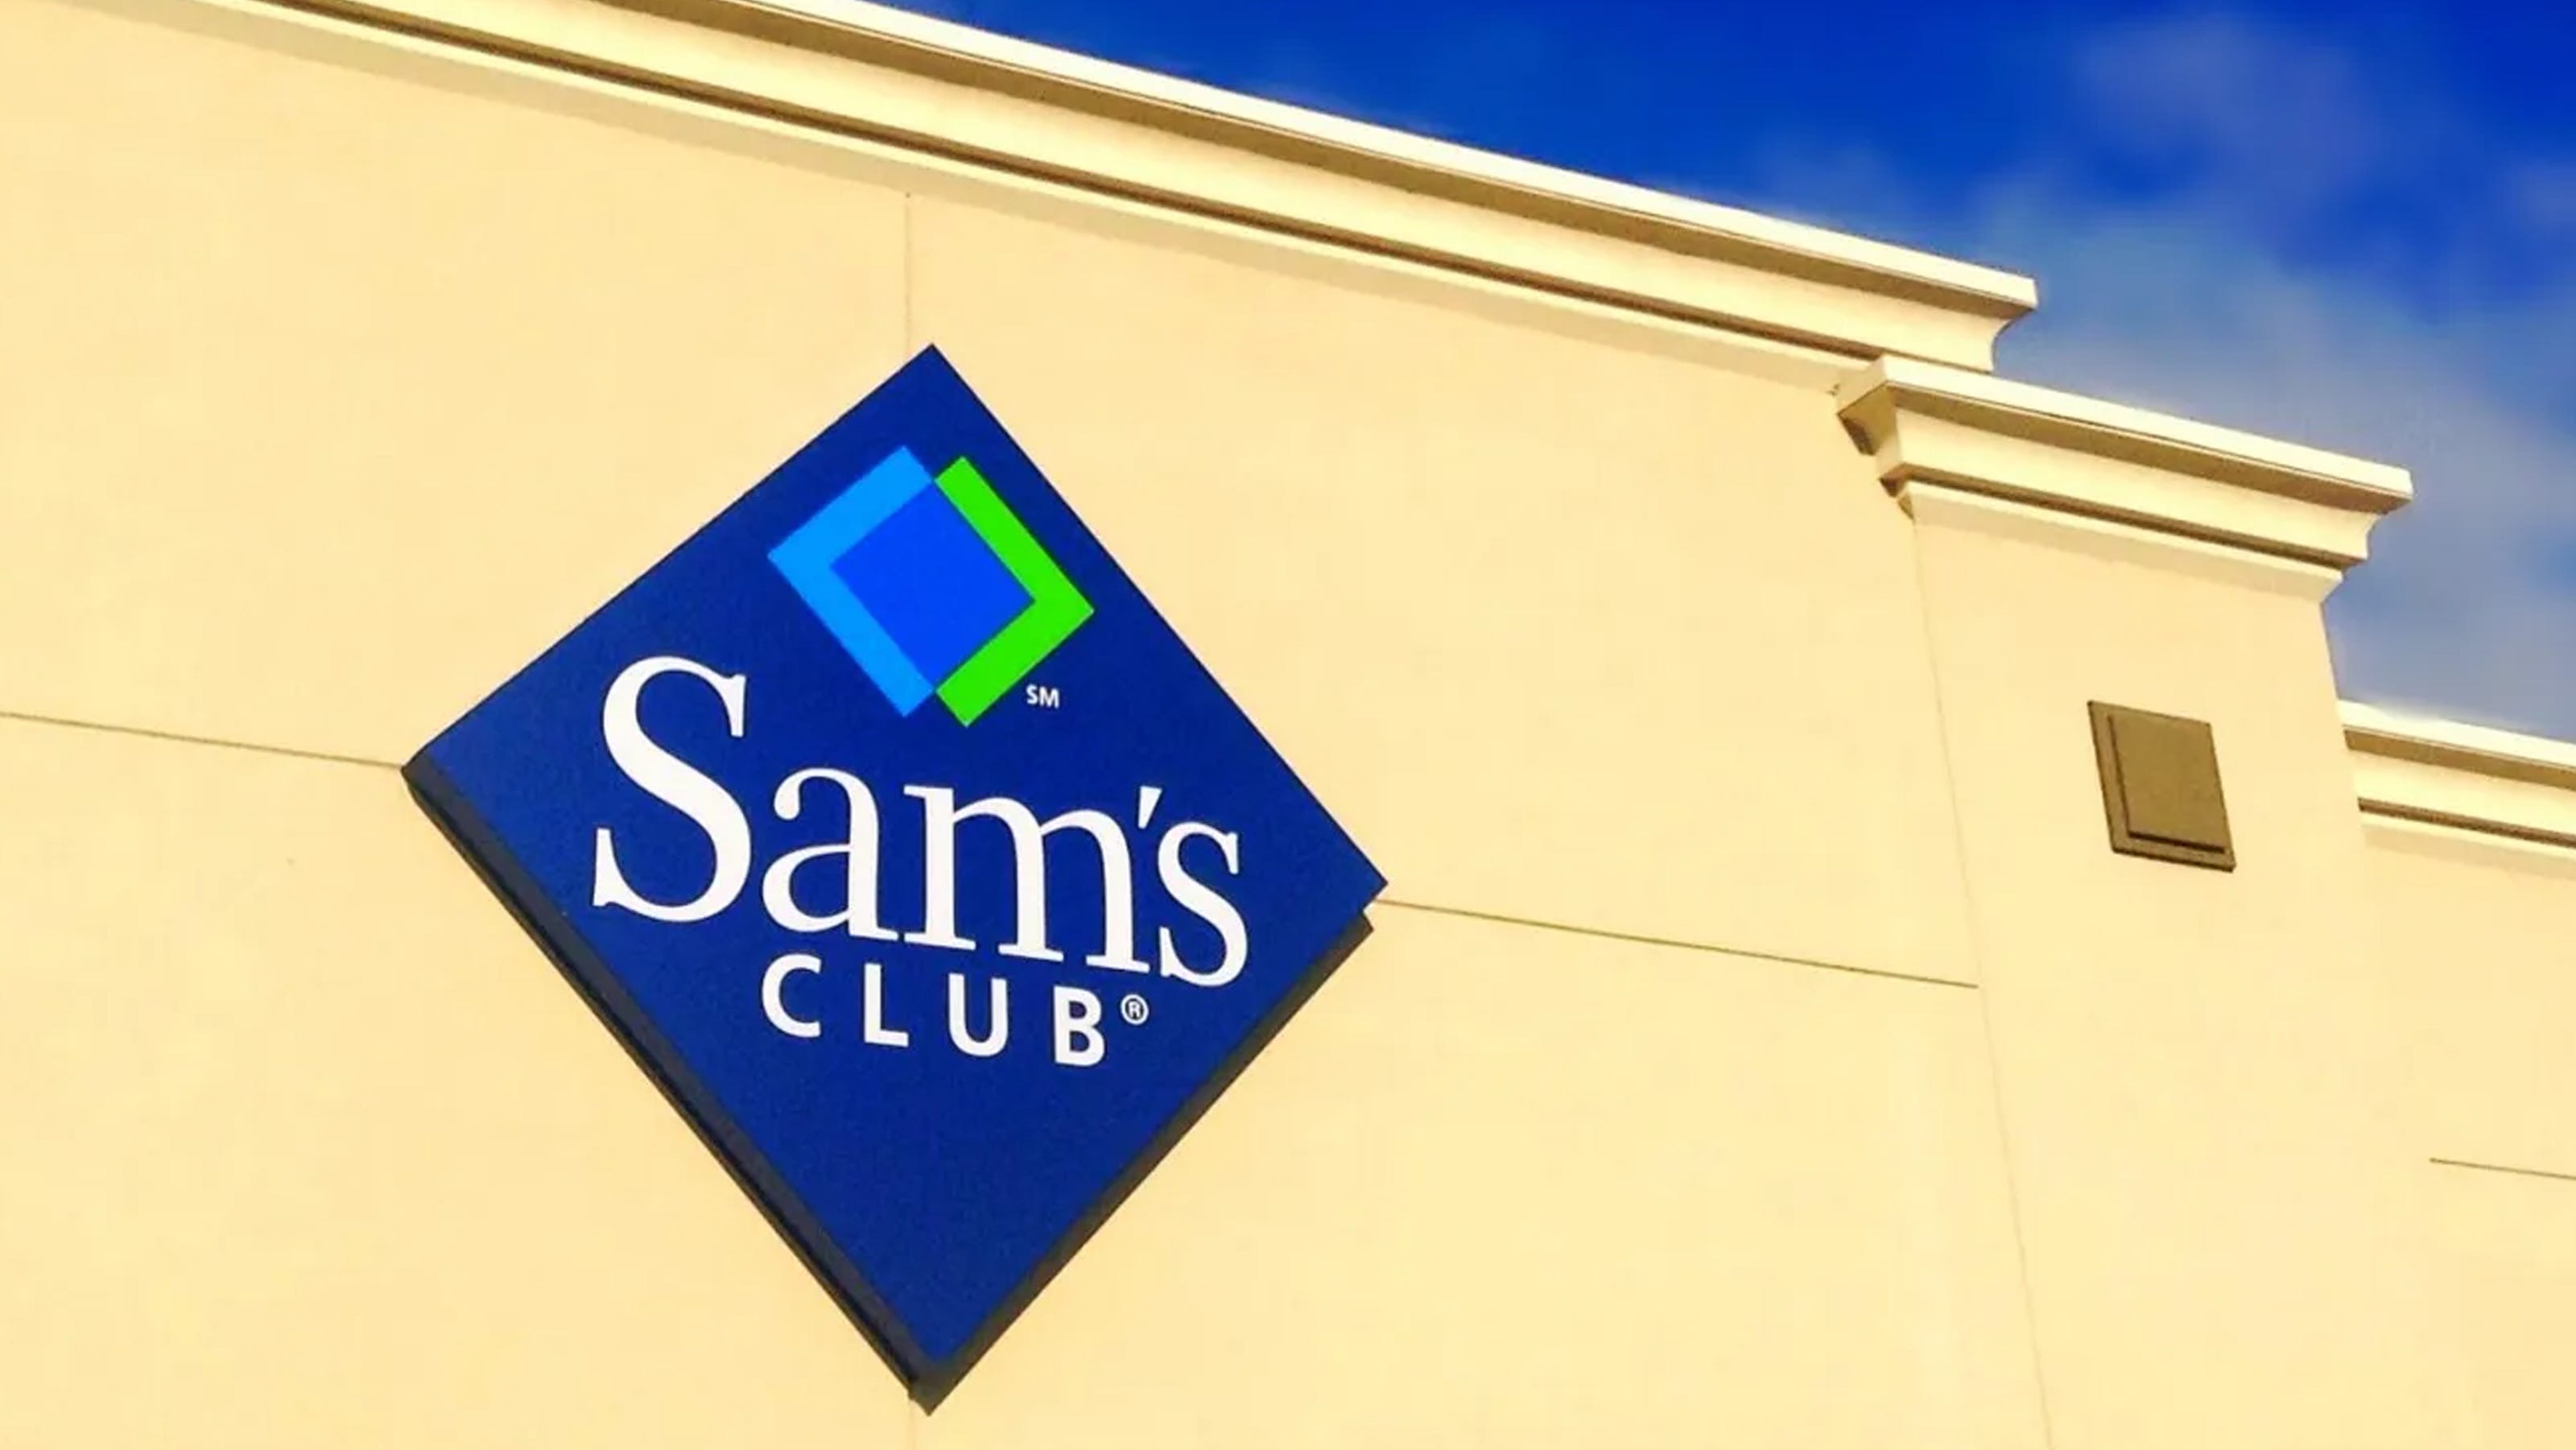 Free Sam's Club membership: Get $45 off when you join for $45